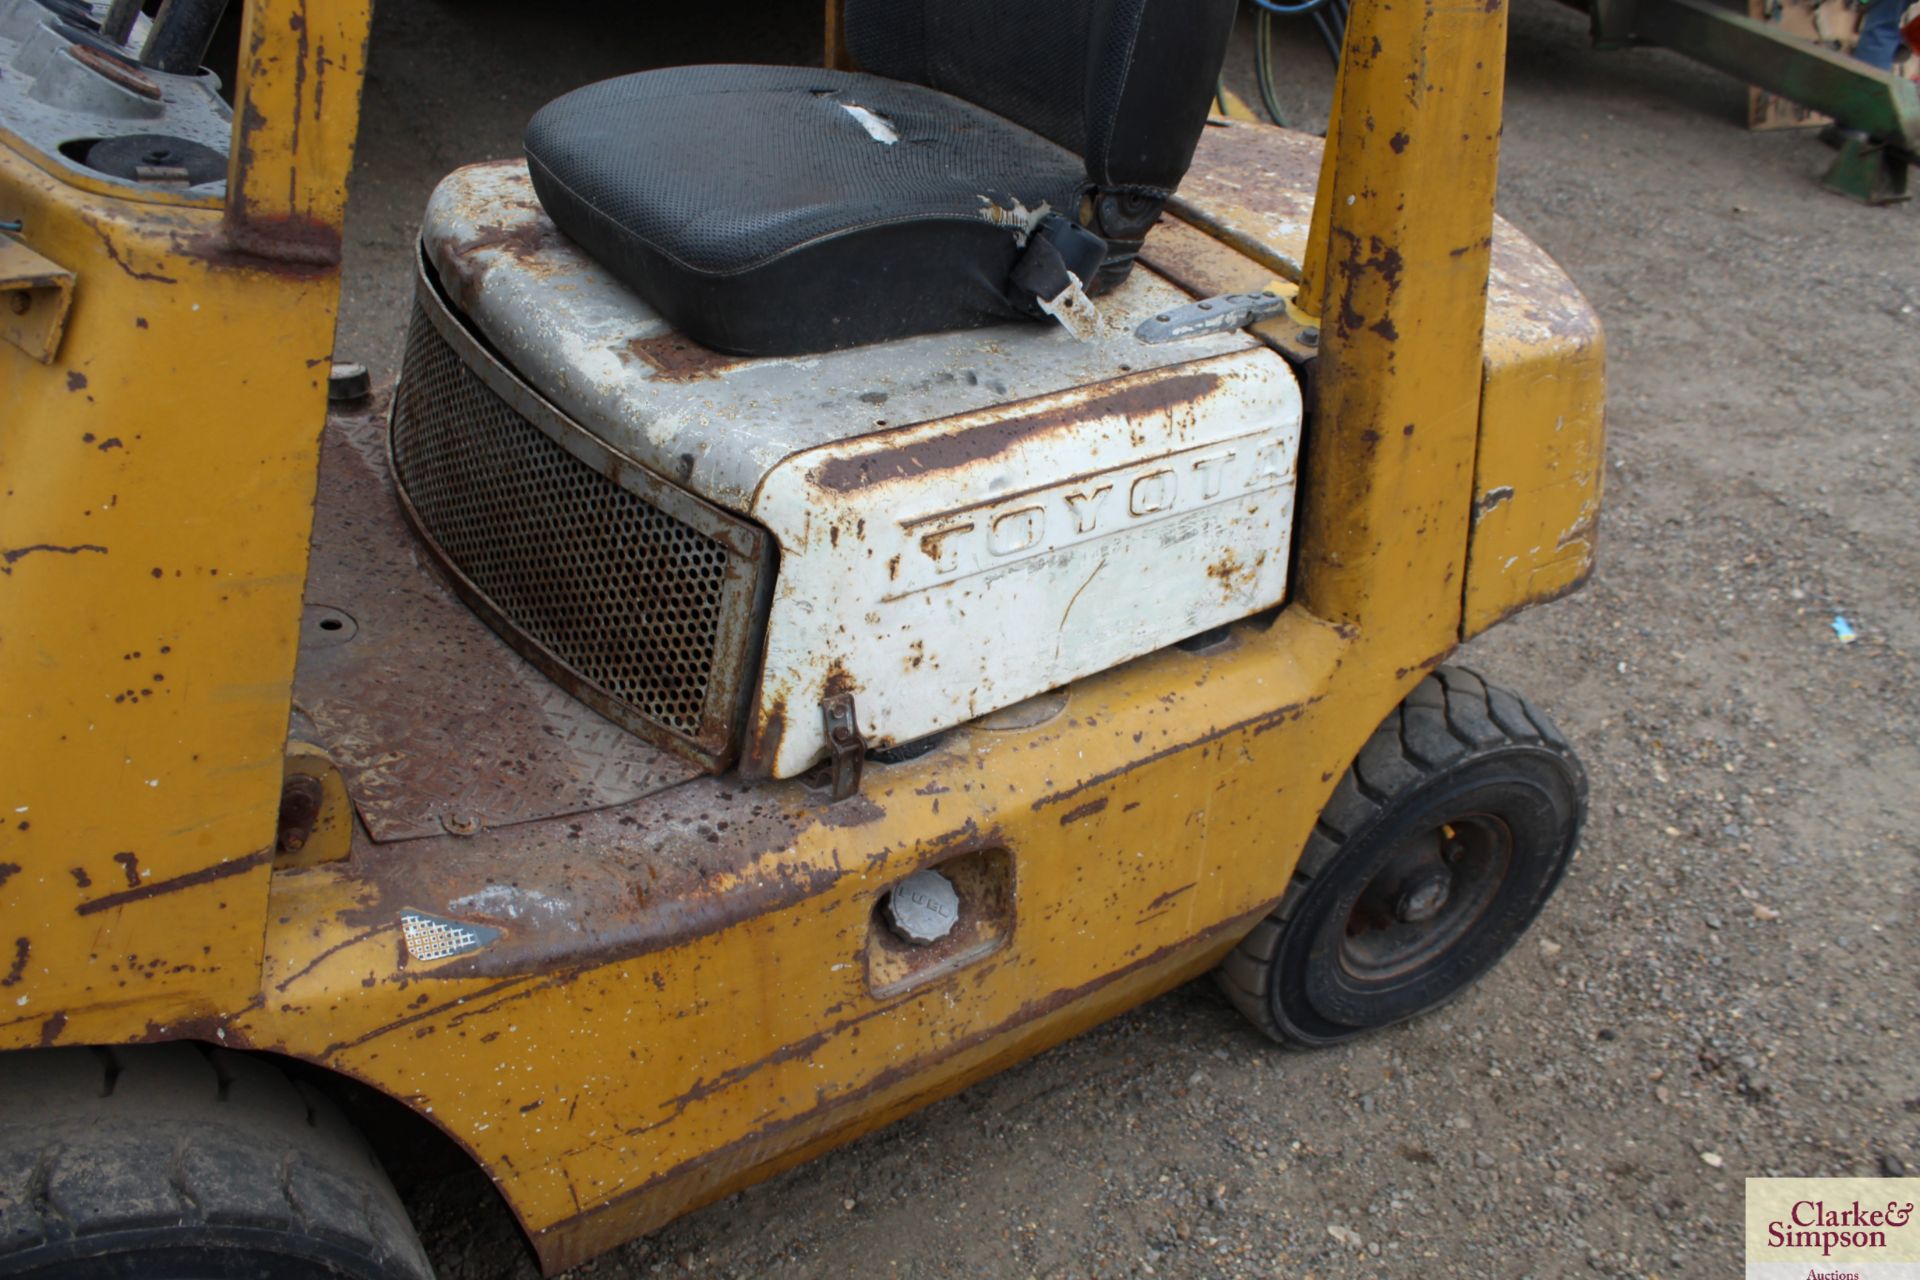 Toyota 02-2FD20 2T diesel forklift.4x366 hours. Vendor reports brakes need attention. V - Image 10 of 16